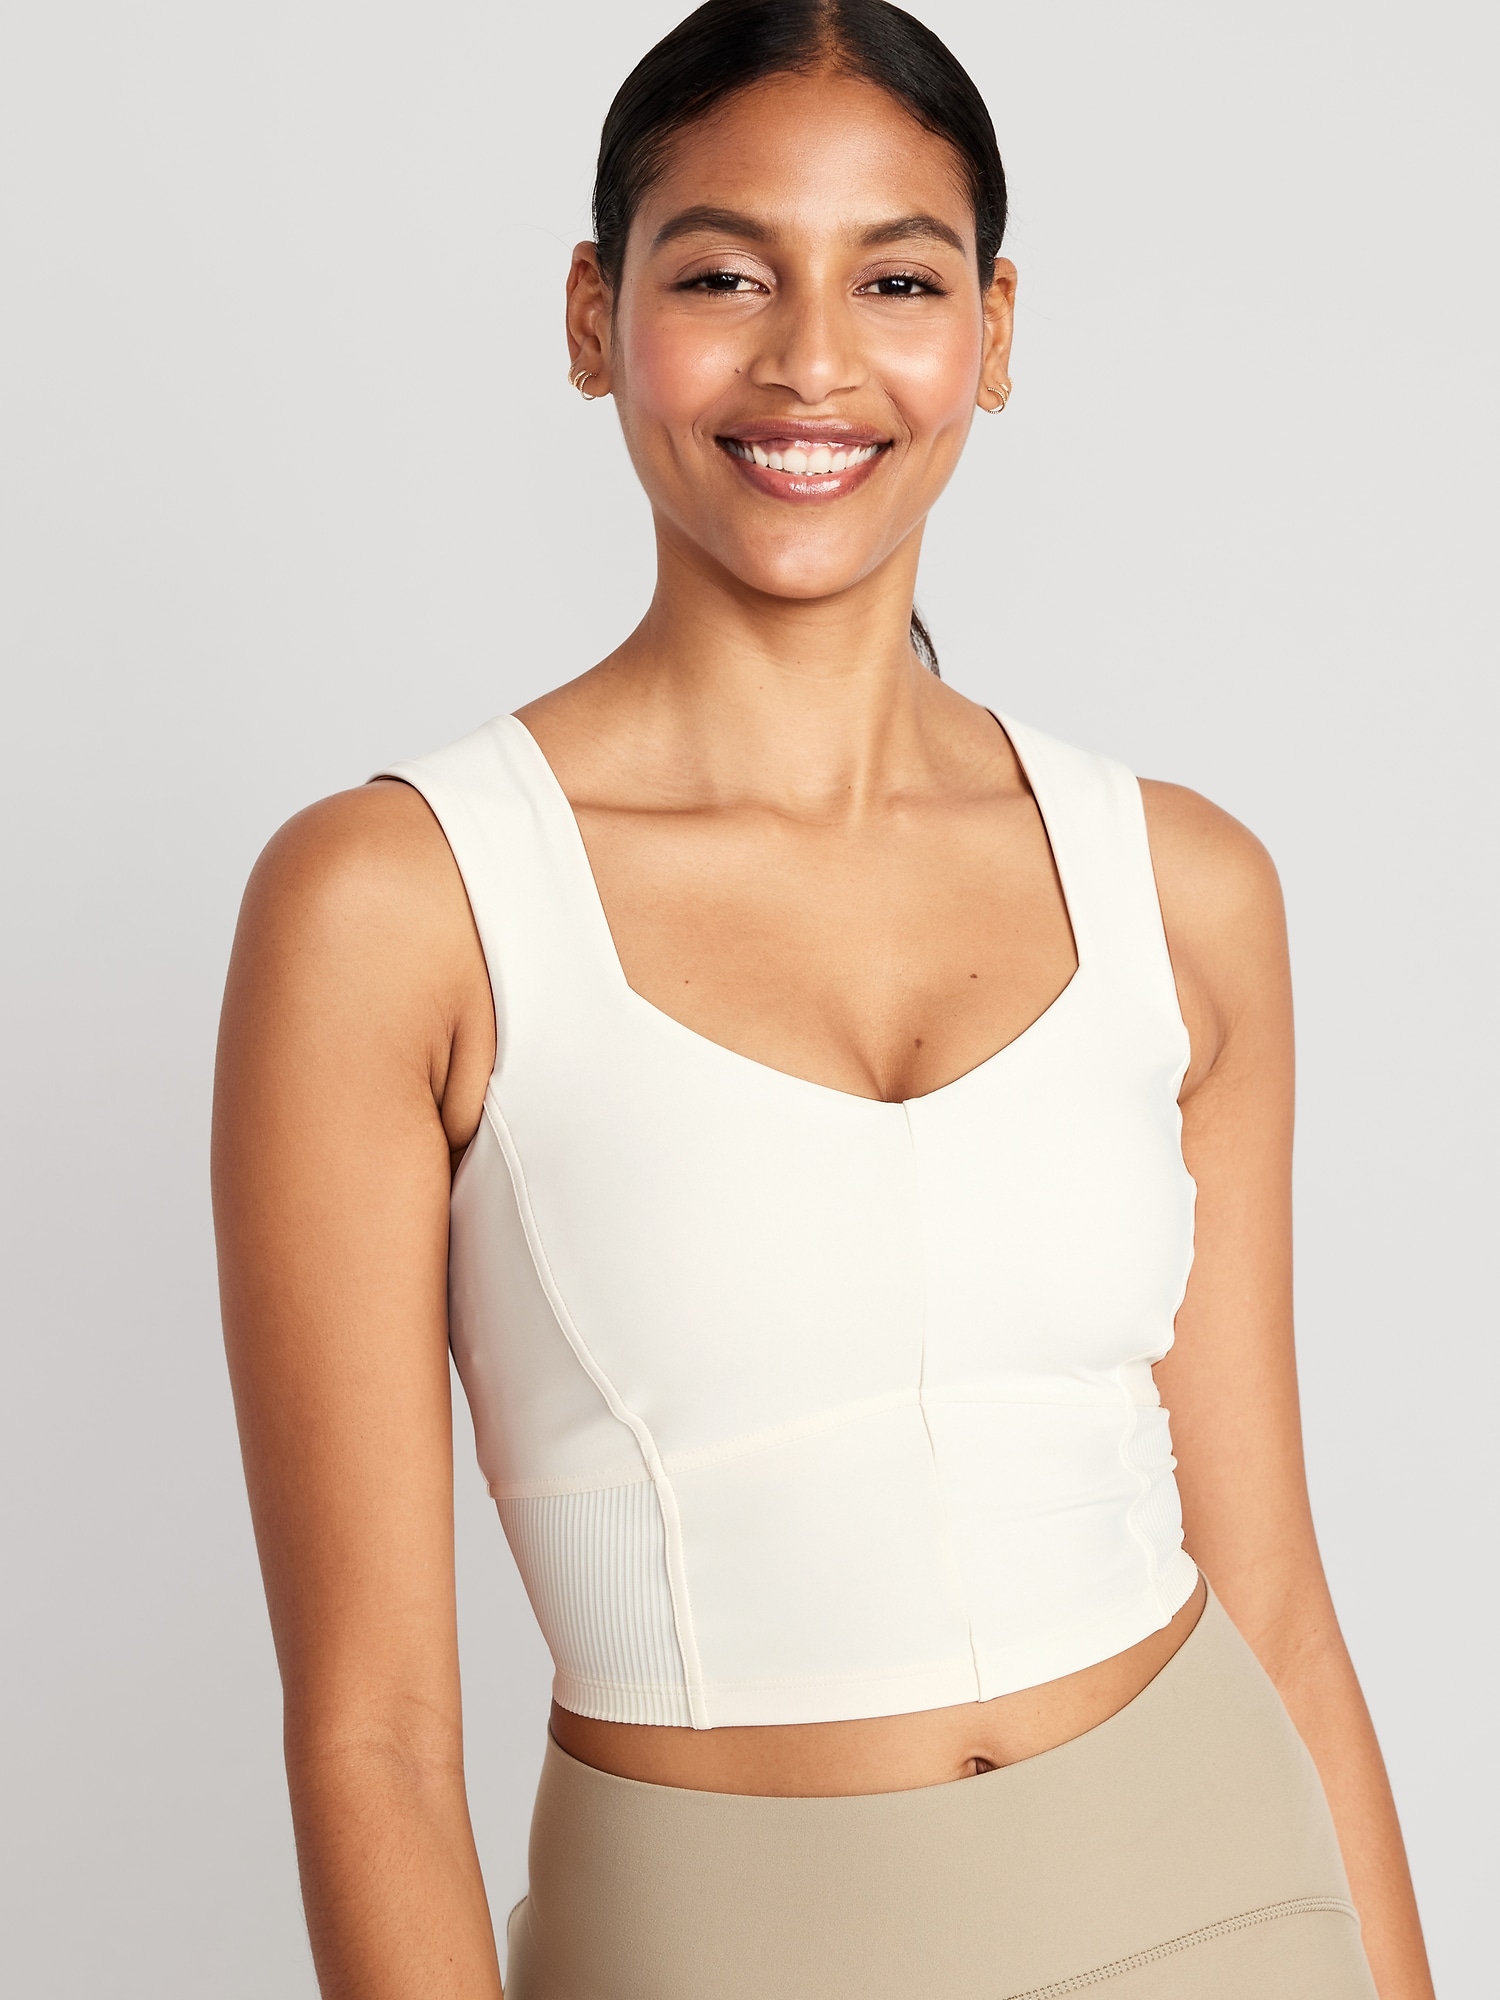 Old Navy Active Light Support PowerSoft Longline Sports Bra Size Small -  $14 - From Emma